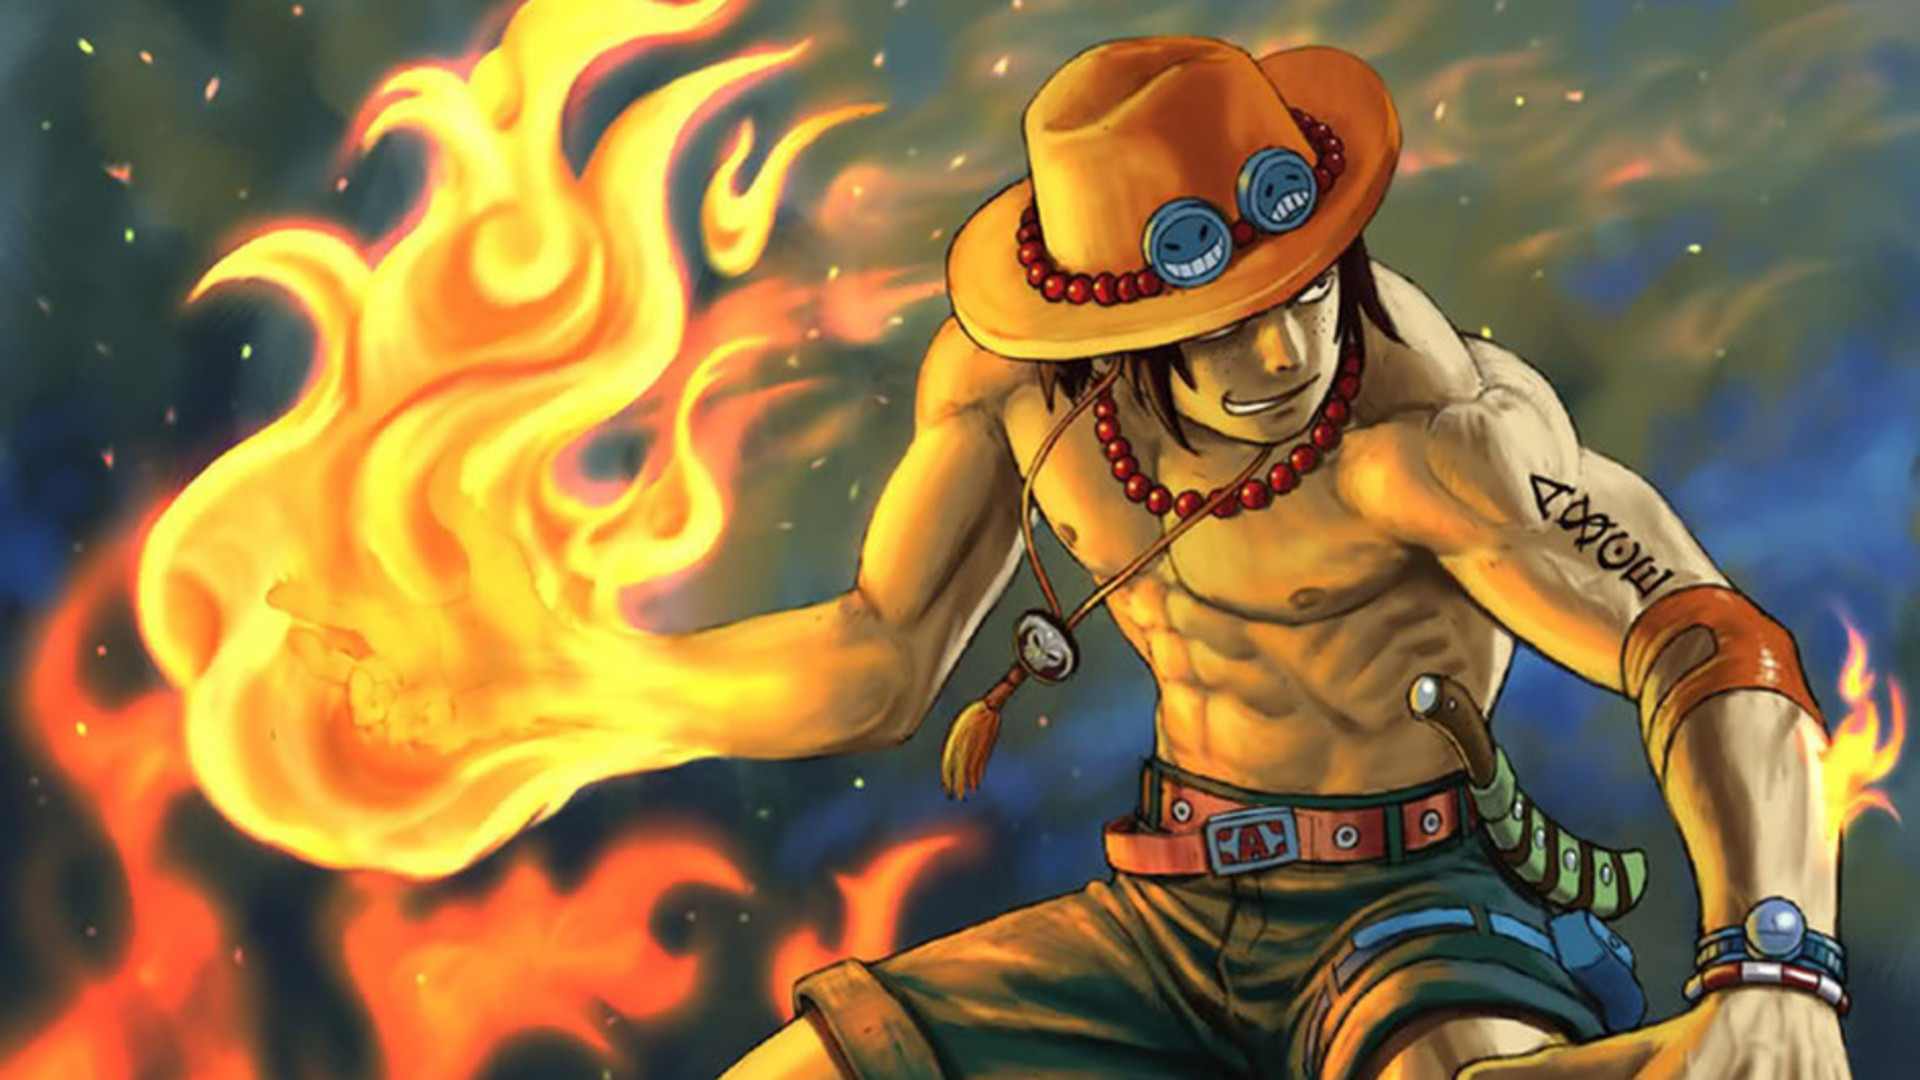 Ace One Piece Wallpapers one piece Pinterest One Piece, One